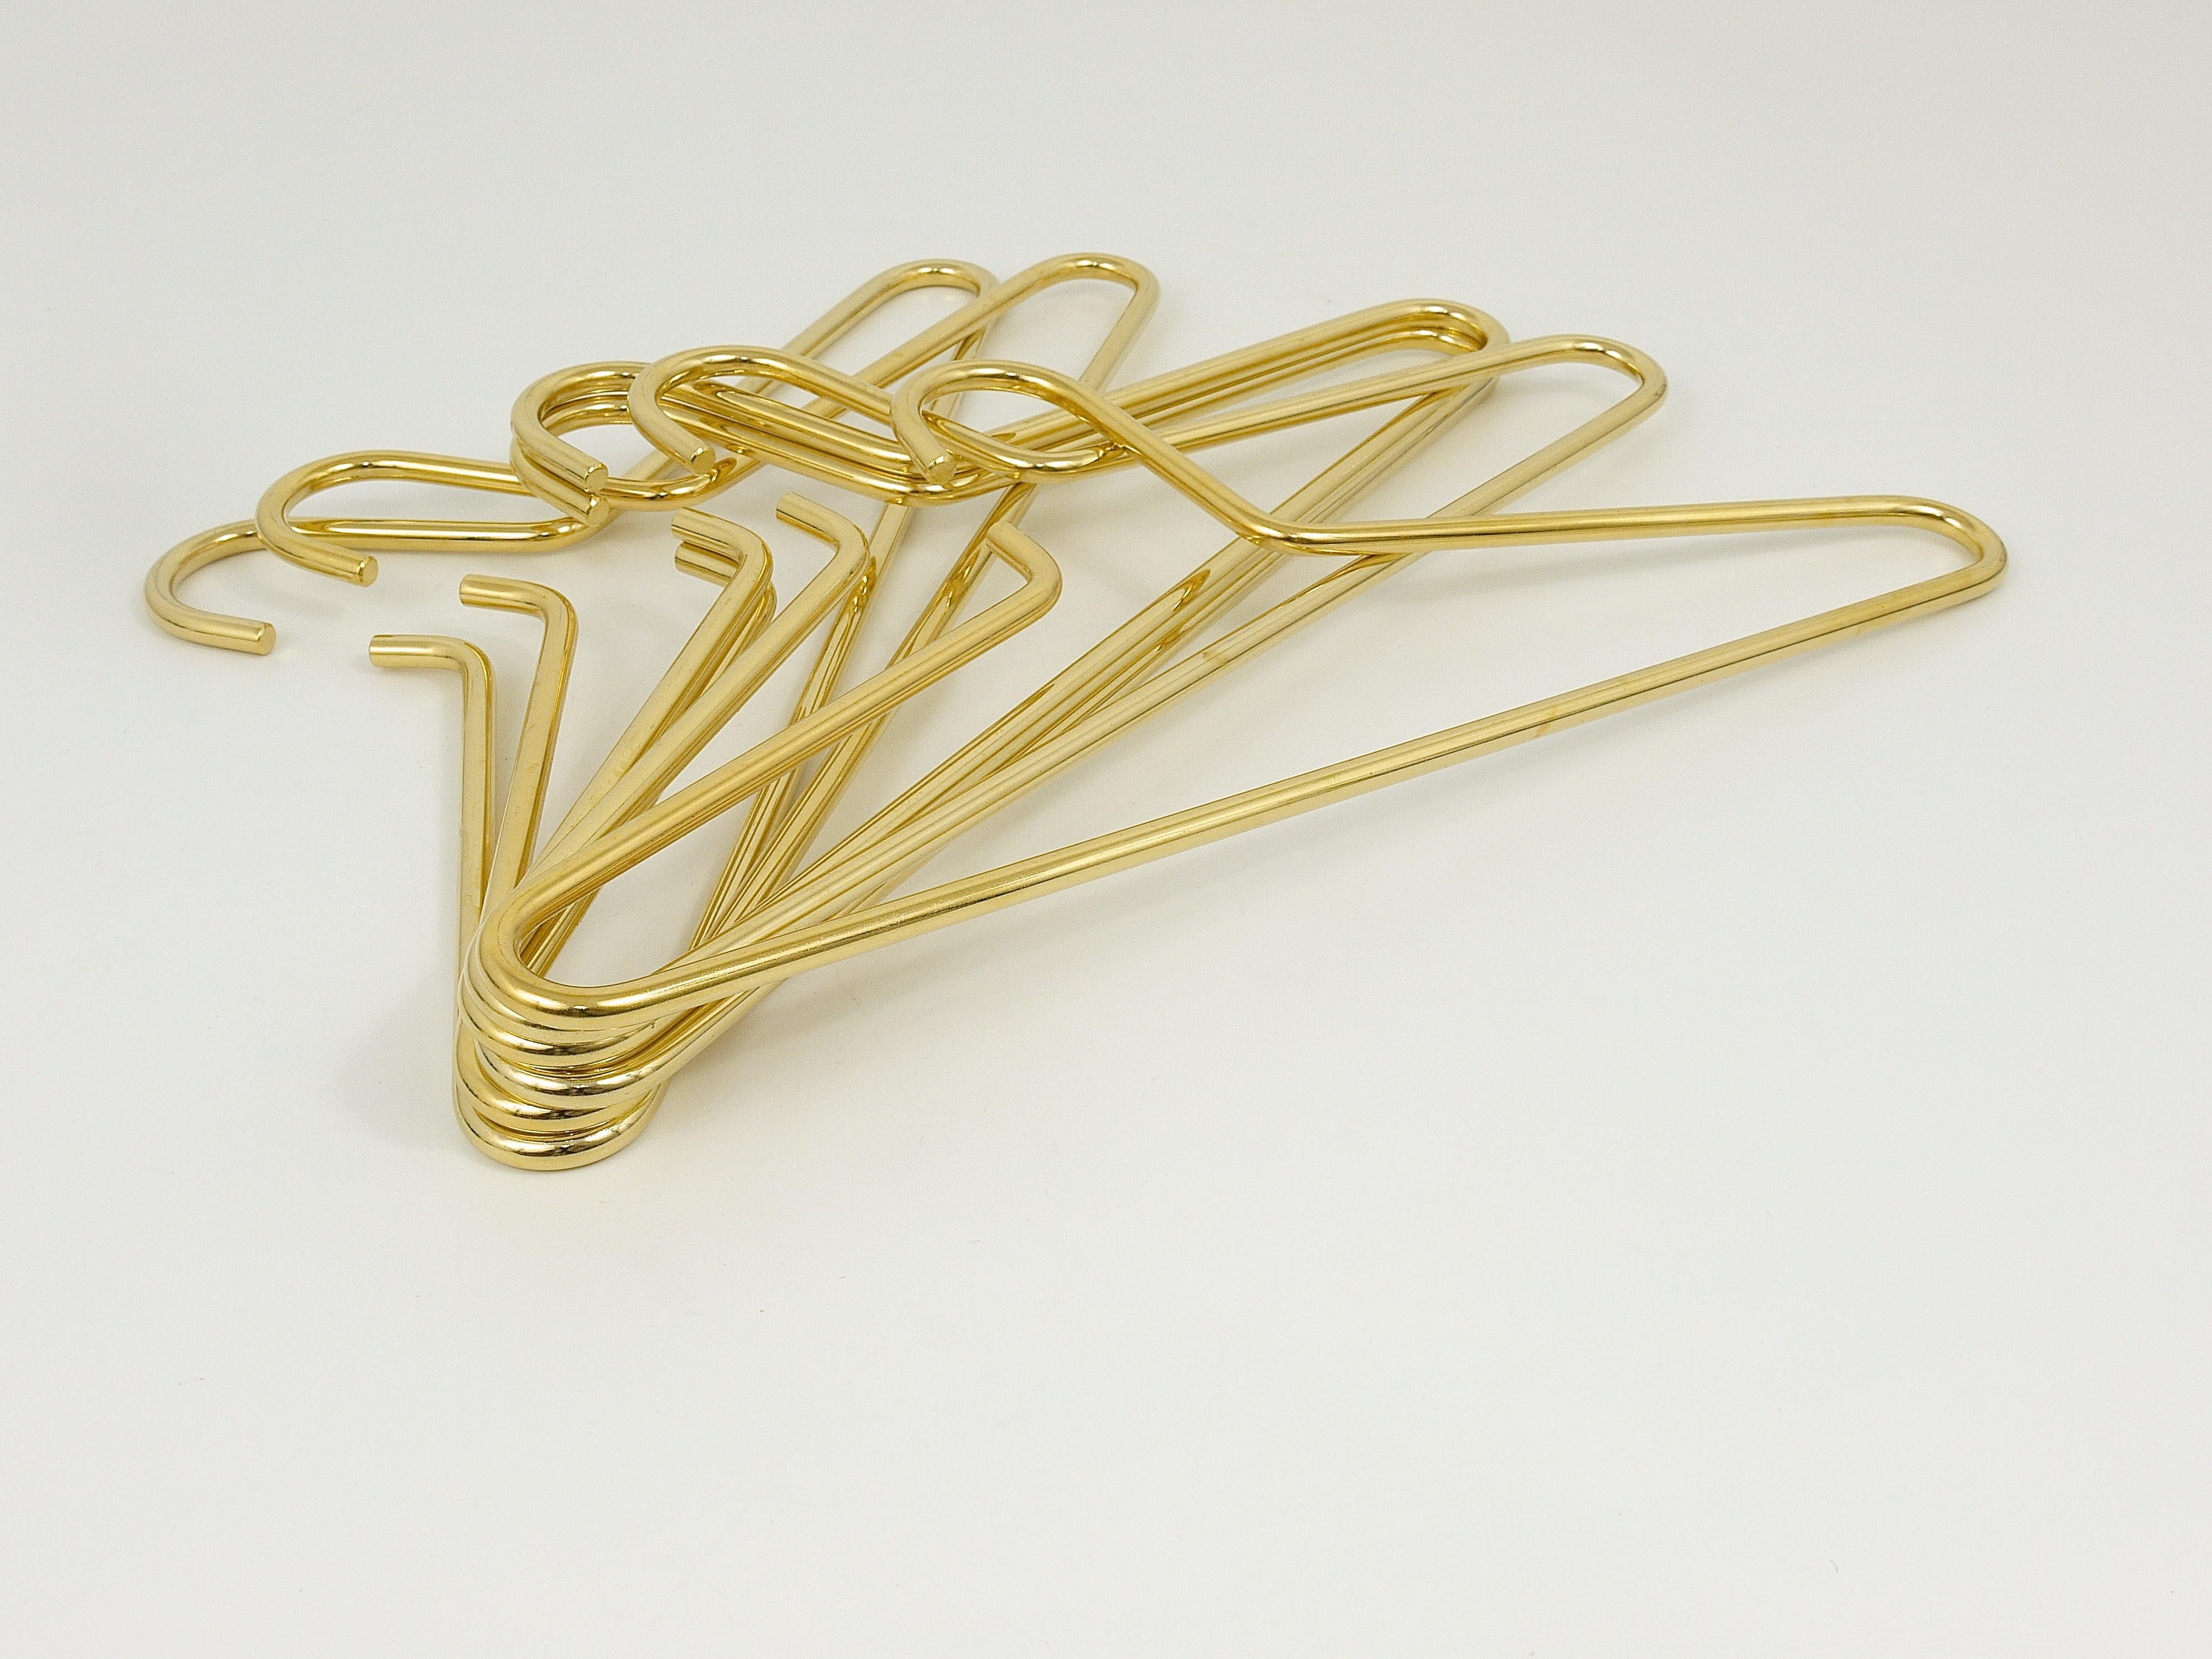 Gold Plate Up to 12 Austrian Modernist Solid Gold-Plated Coat Hangers from the 1970s For Sale